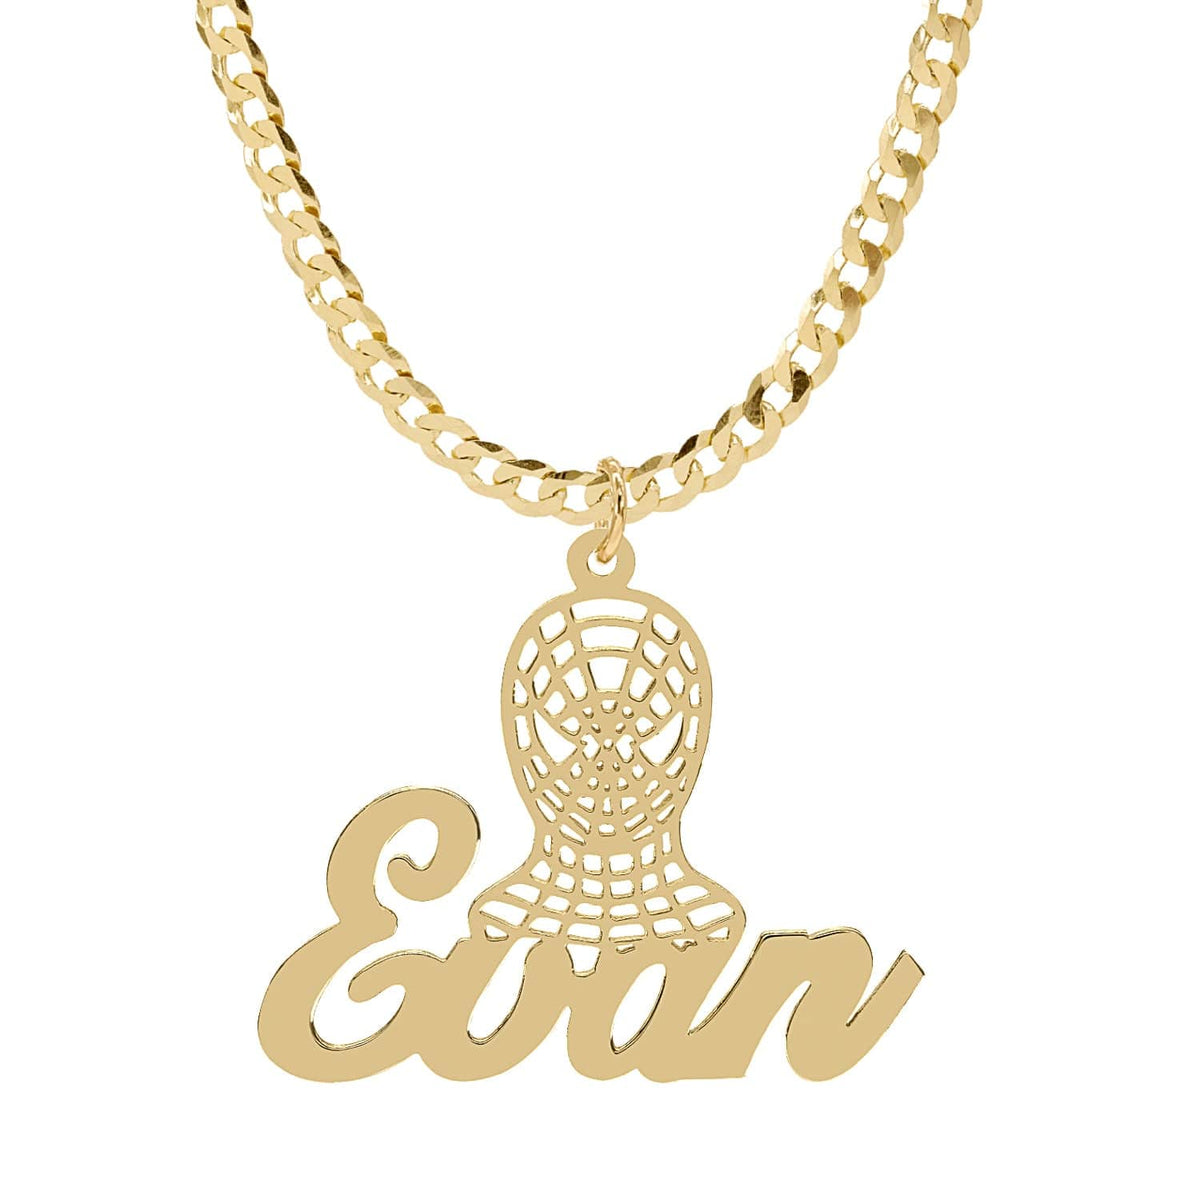 14K Gold over Sterling Silver / Cuban Chain Copy of Personalized Name necklace with Diamond Cut &quot;Sekani&quot;